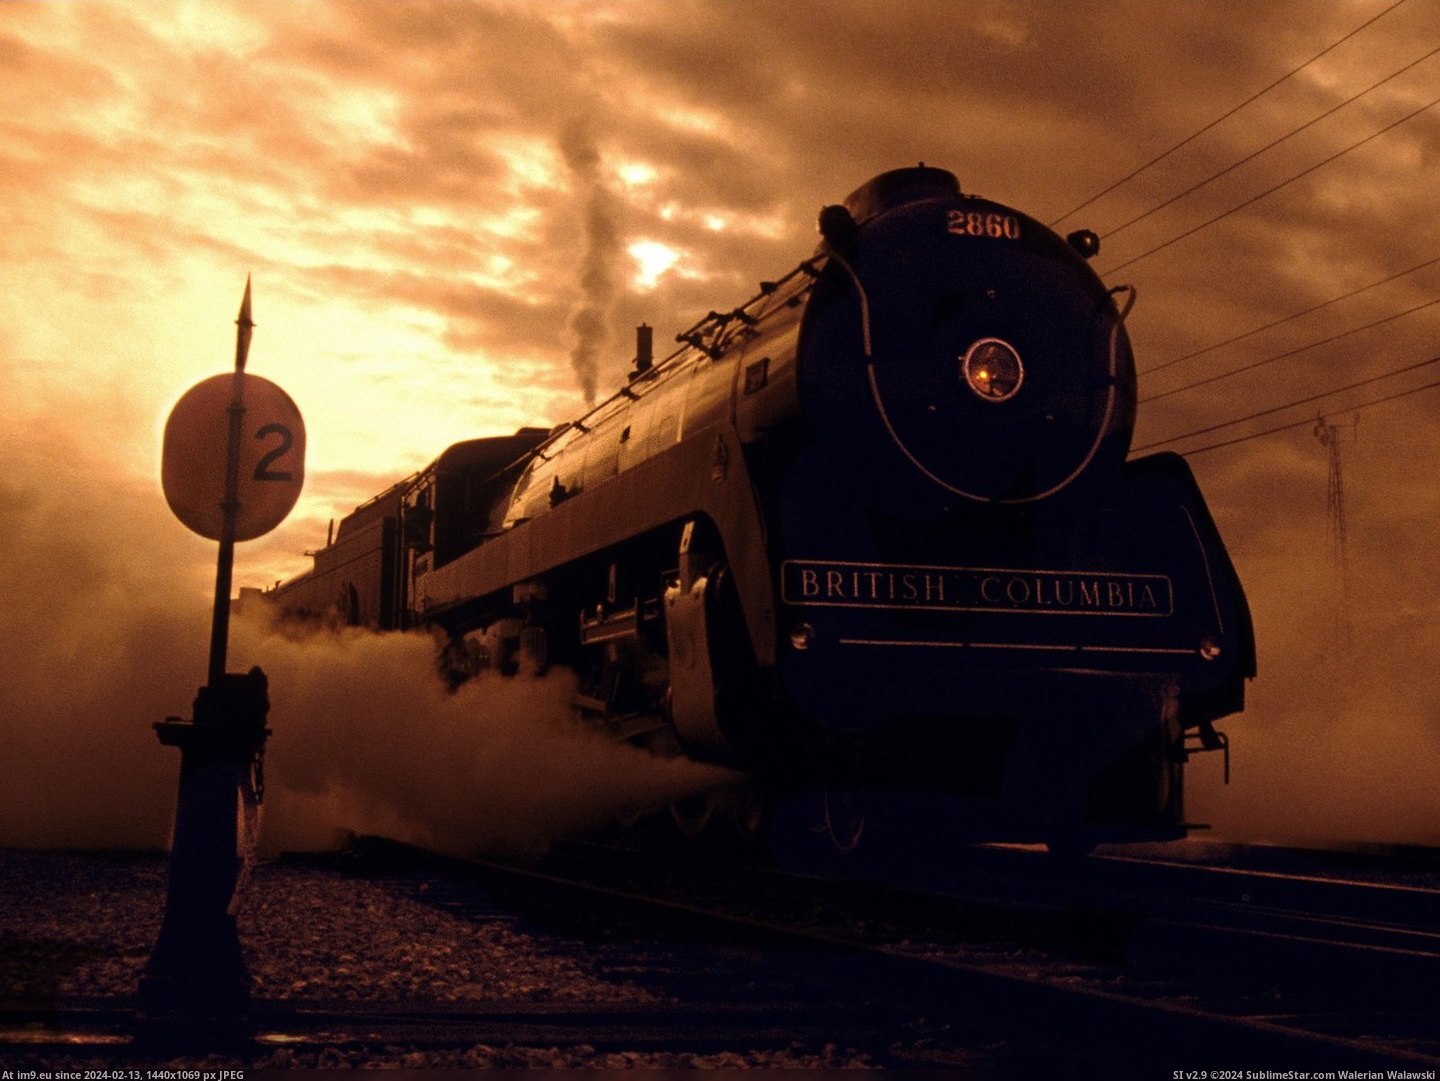 Royal Hudson Steam Engine at Daybreak, Vancouver, British Columbia (in Beautiful photos and wallpapers)